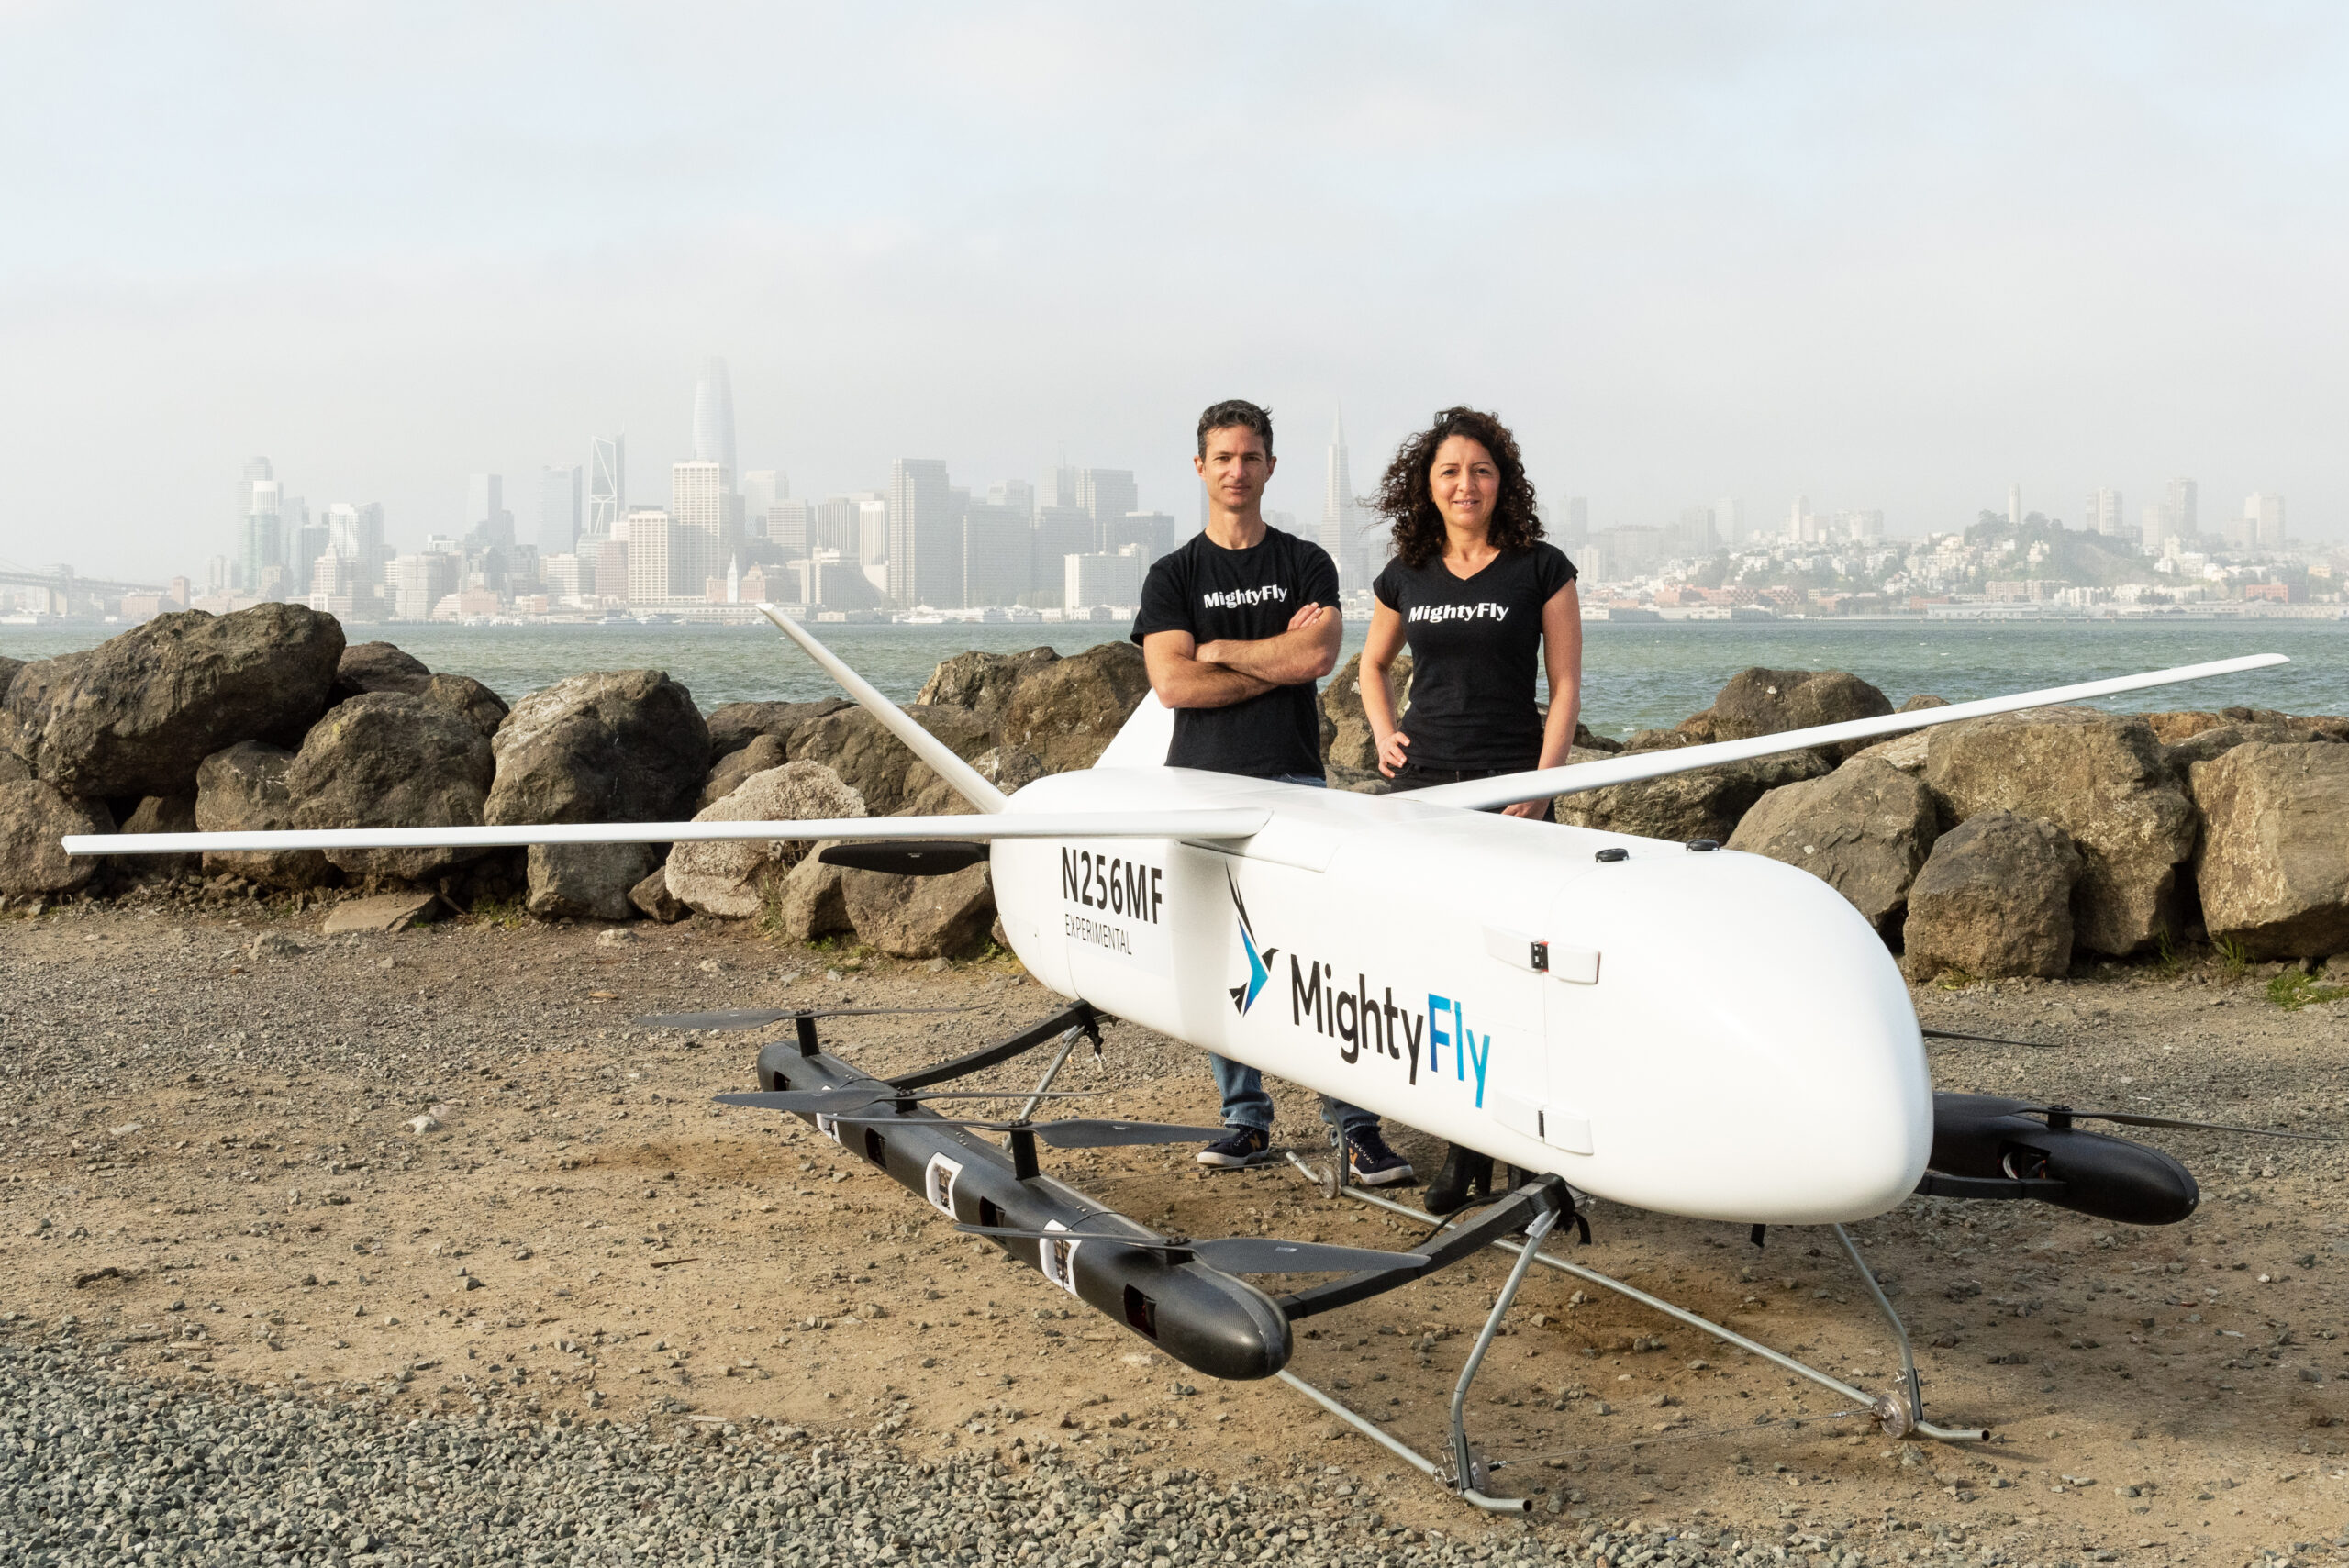 MightyFly’s Next-Generation Drones Have Sky-High Potential